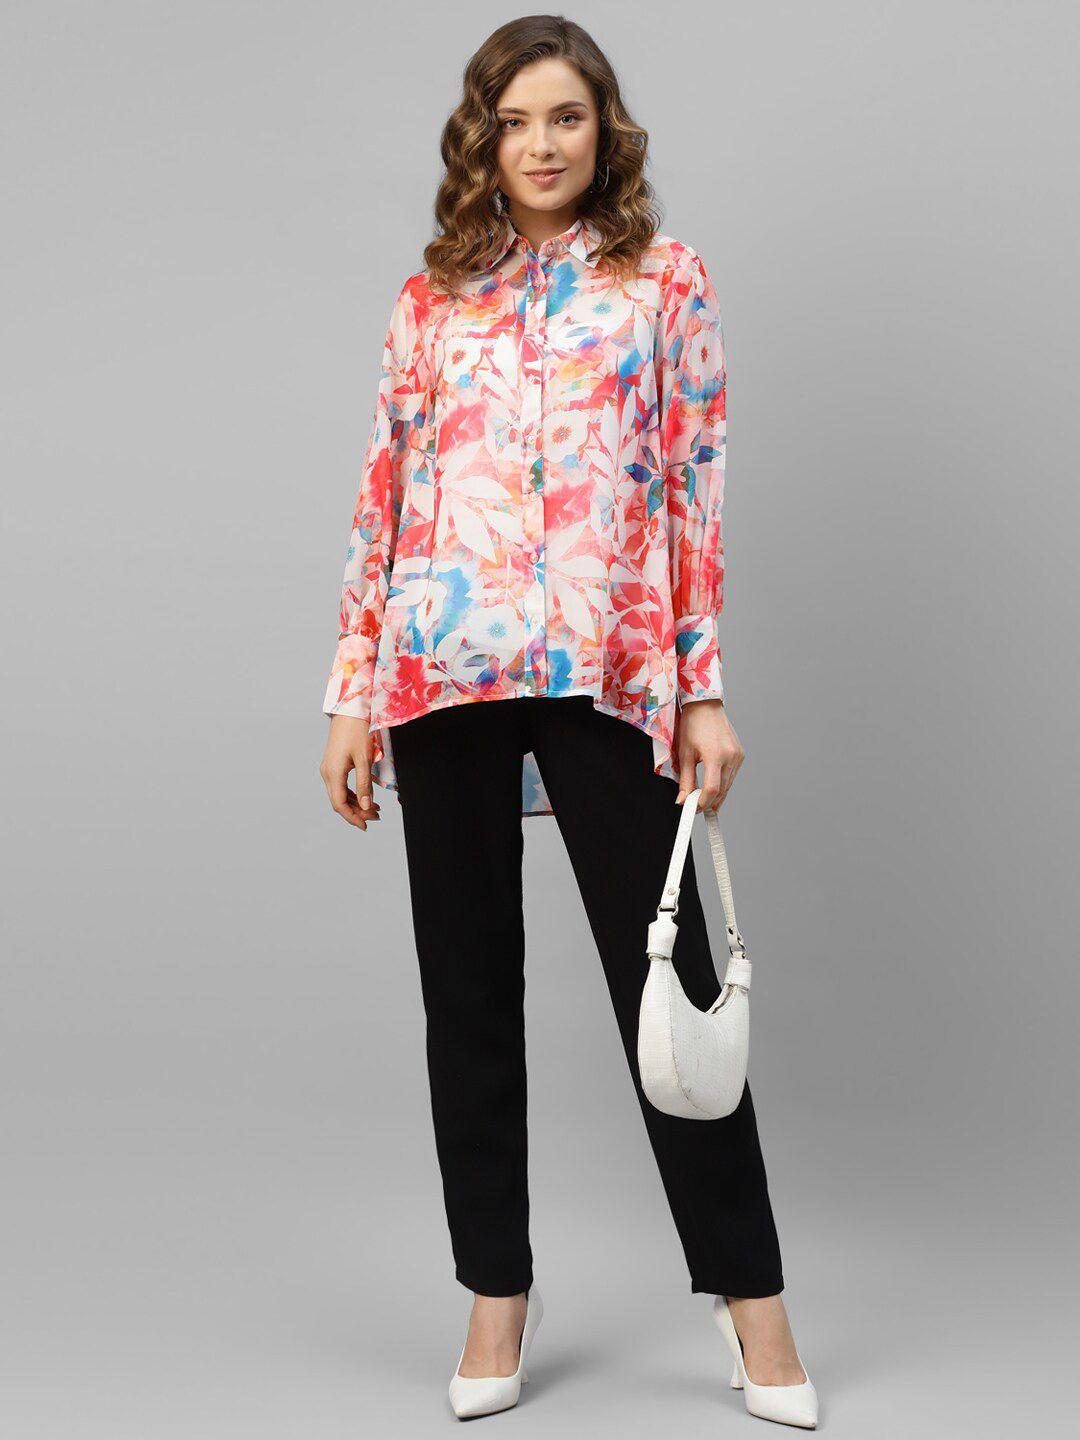 deebaco premium boxy fit floral printed cuff sleeves high-low hem opaque casual shirt